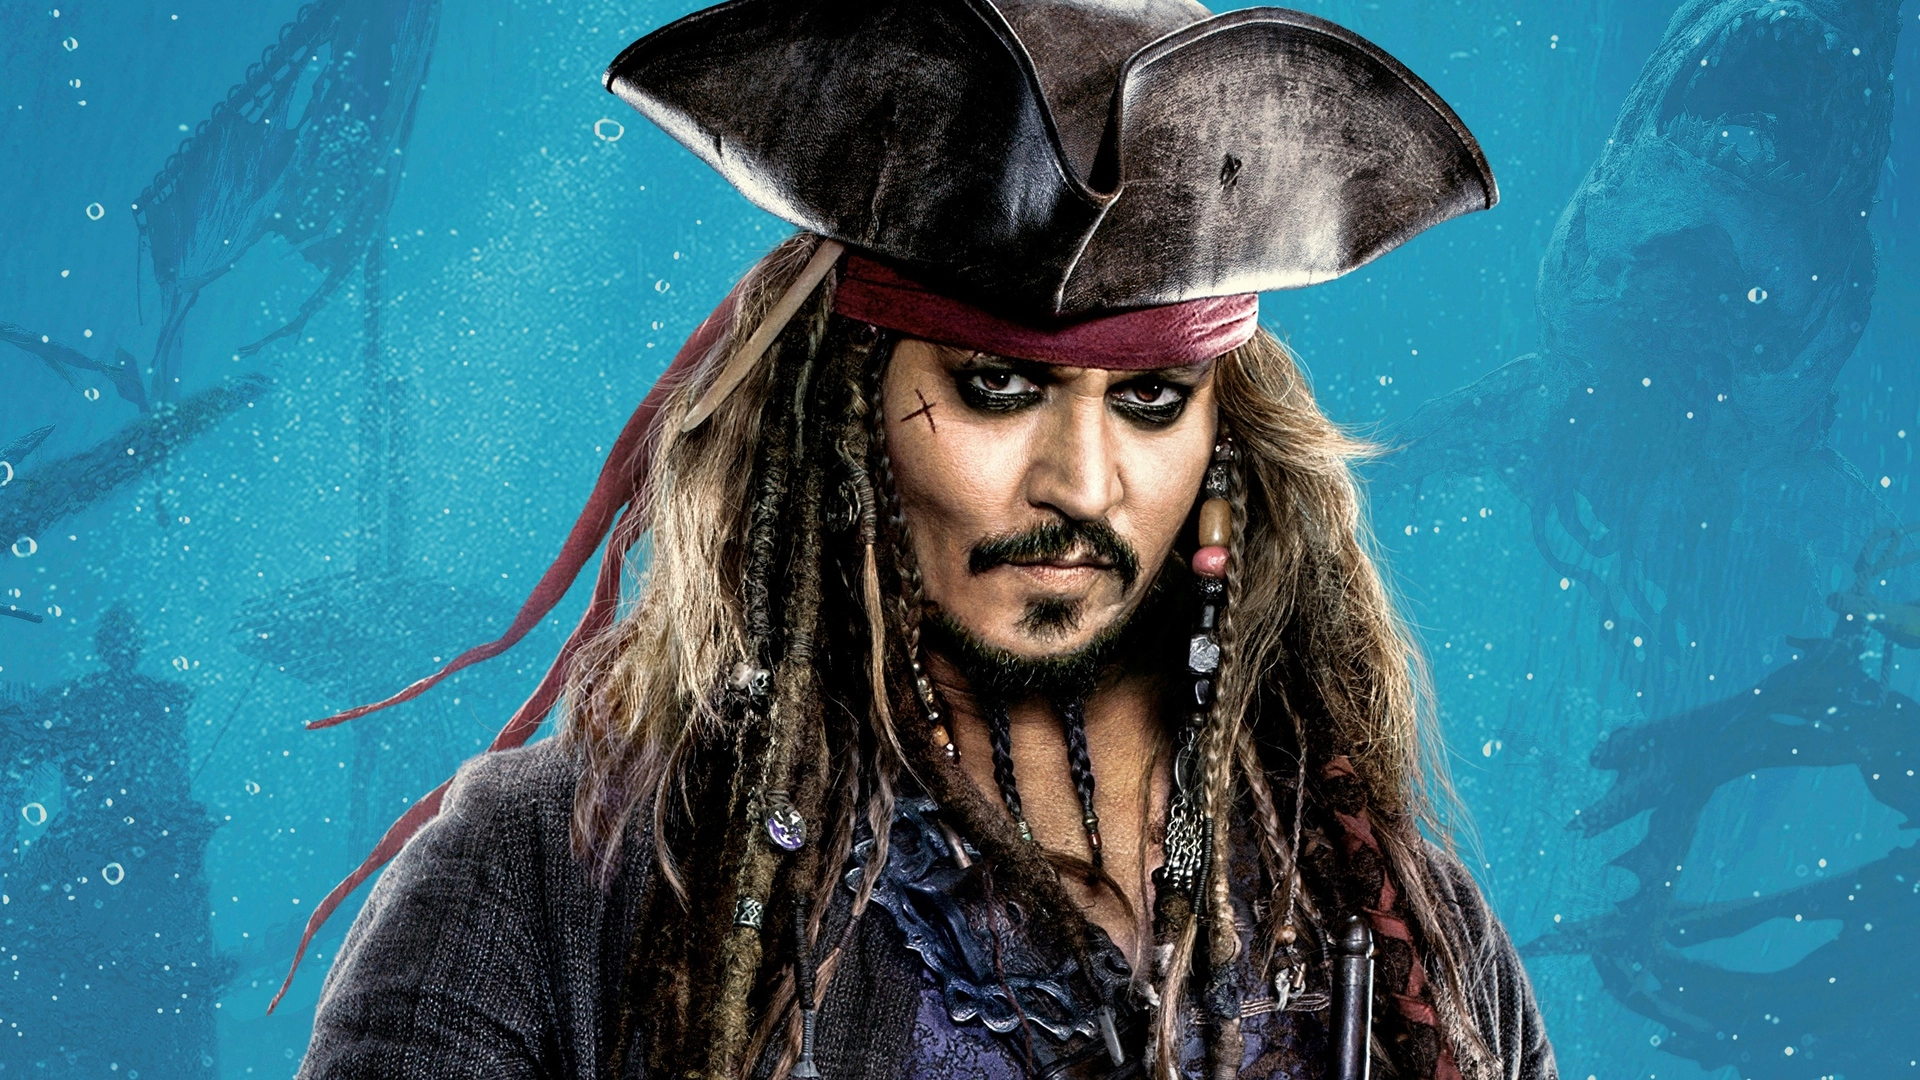 The producer of 'Pirates of the Caribbean' called a possible replacement for Depp in the new film